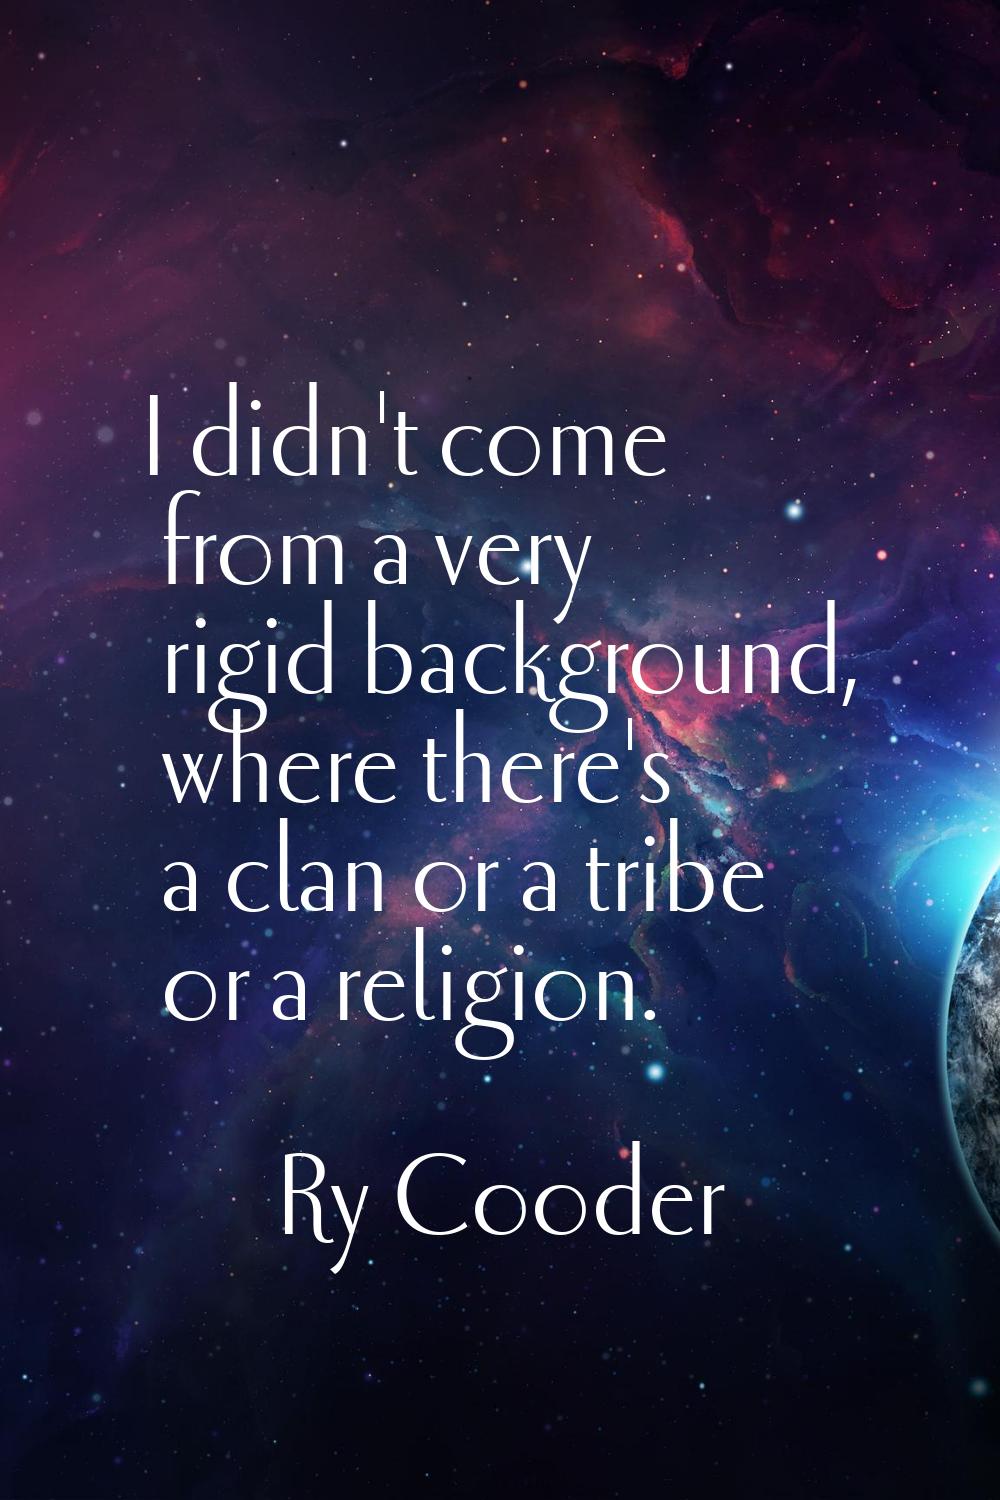 I didn't come from a very rigid background, where there's a clan or a tribe or a religion.